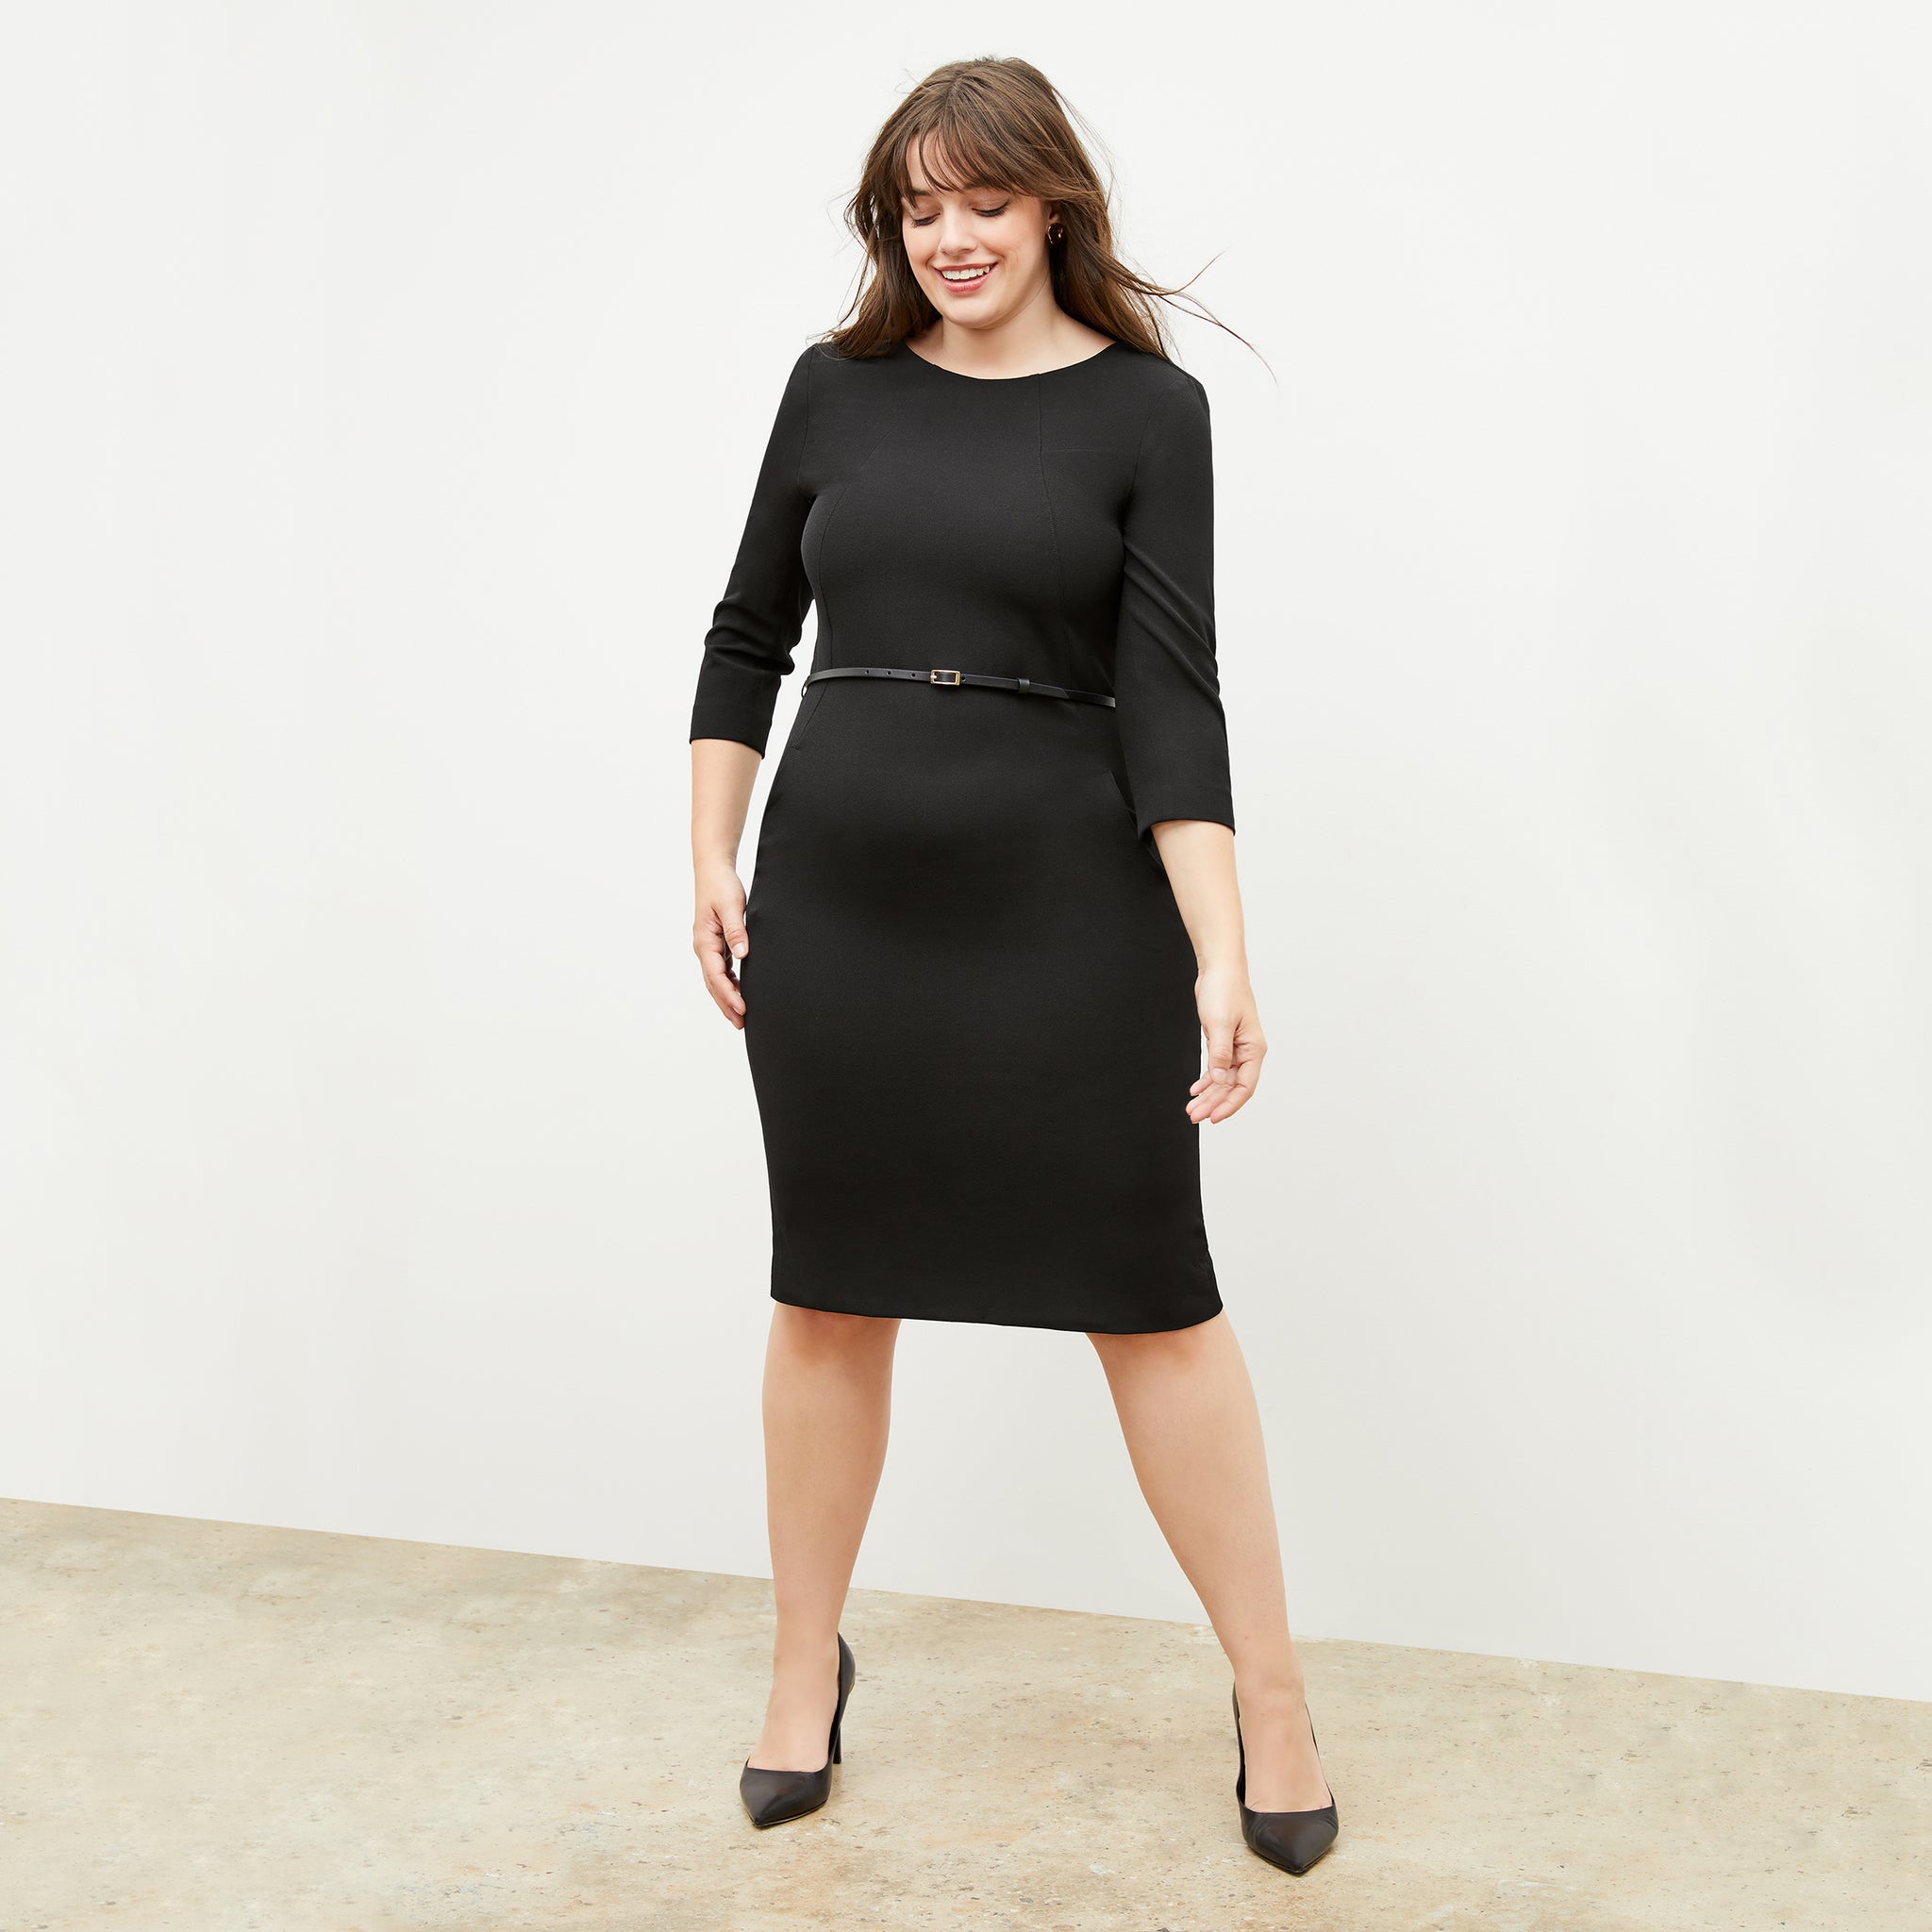 Front image of a woman standing wearing the Etsuko dress in black